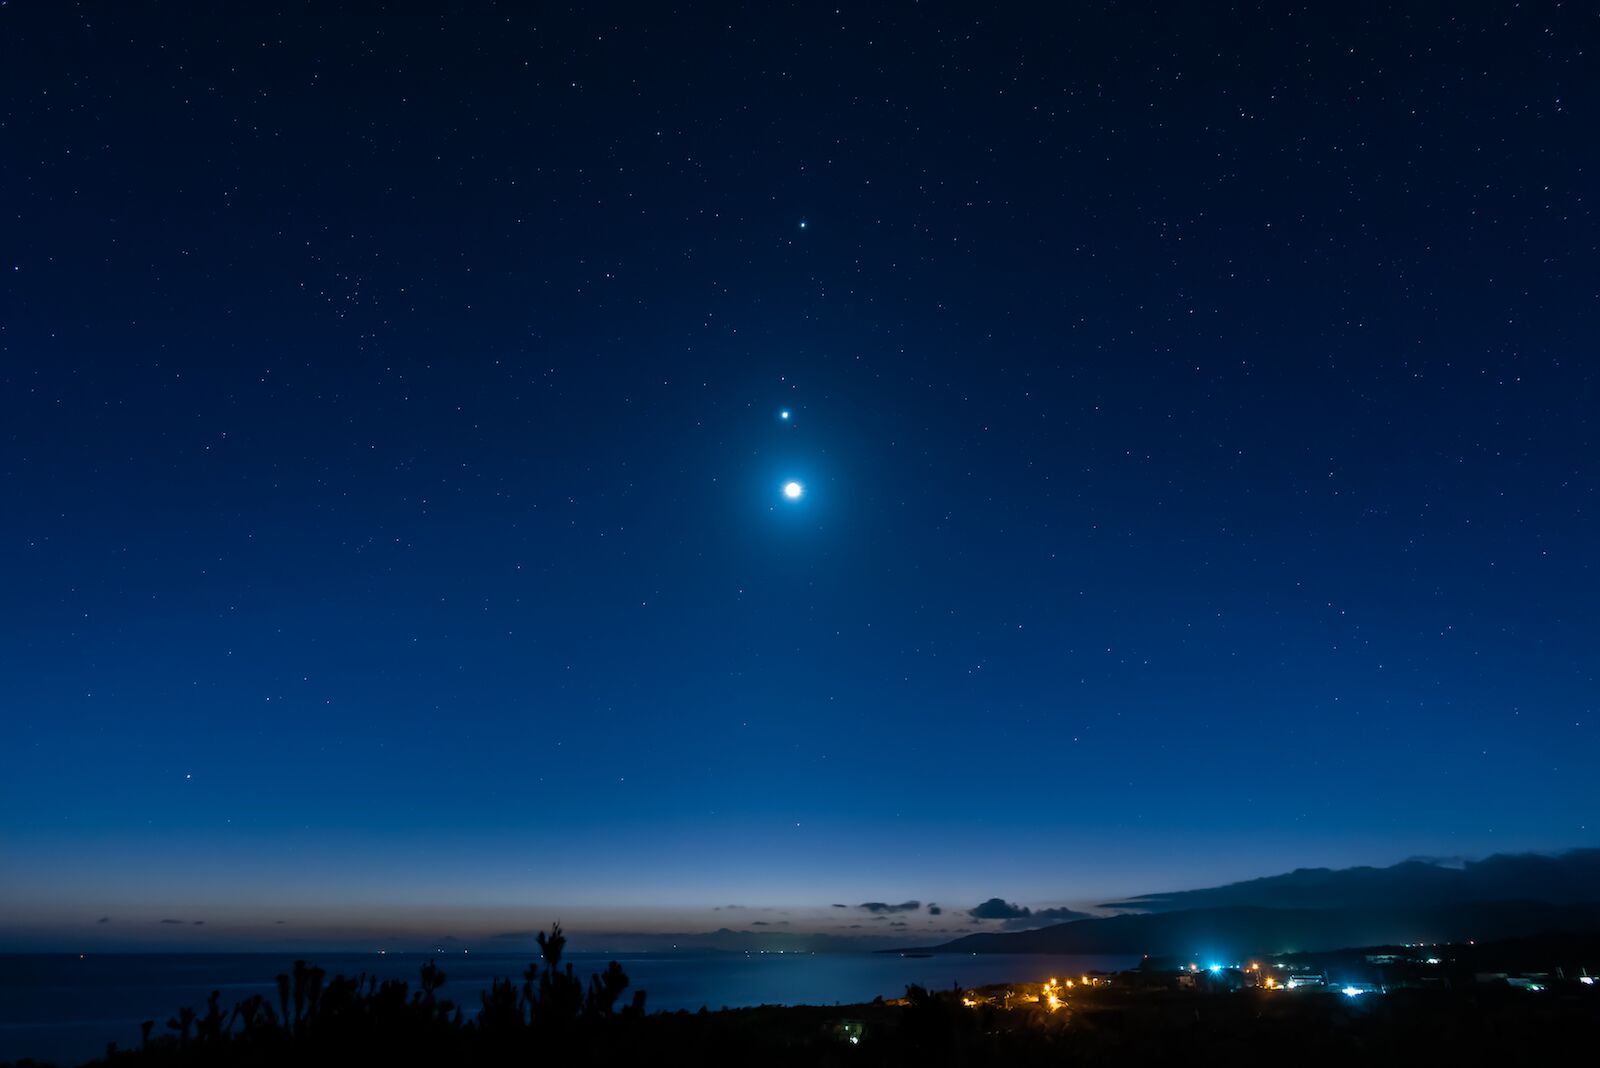 Breathtaking view of a starry sky, Venus, Jupiter and moon line up. Top view of a seashore city before dawn. Iriomote Island, natural world heritage.